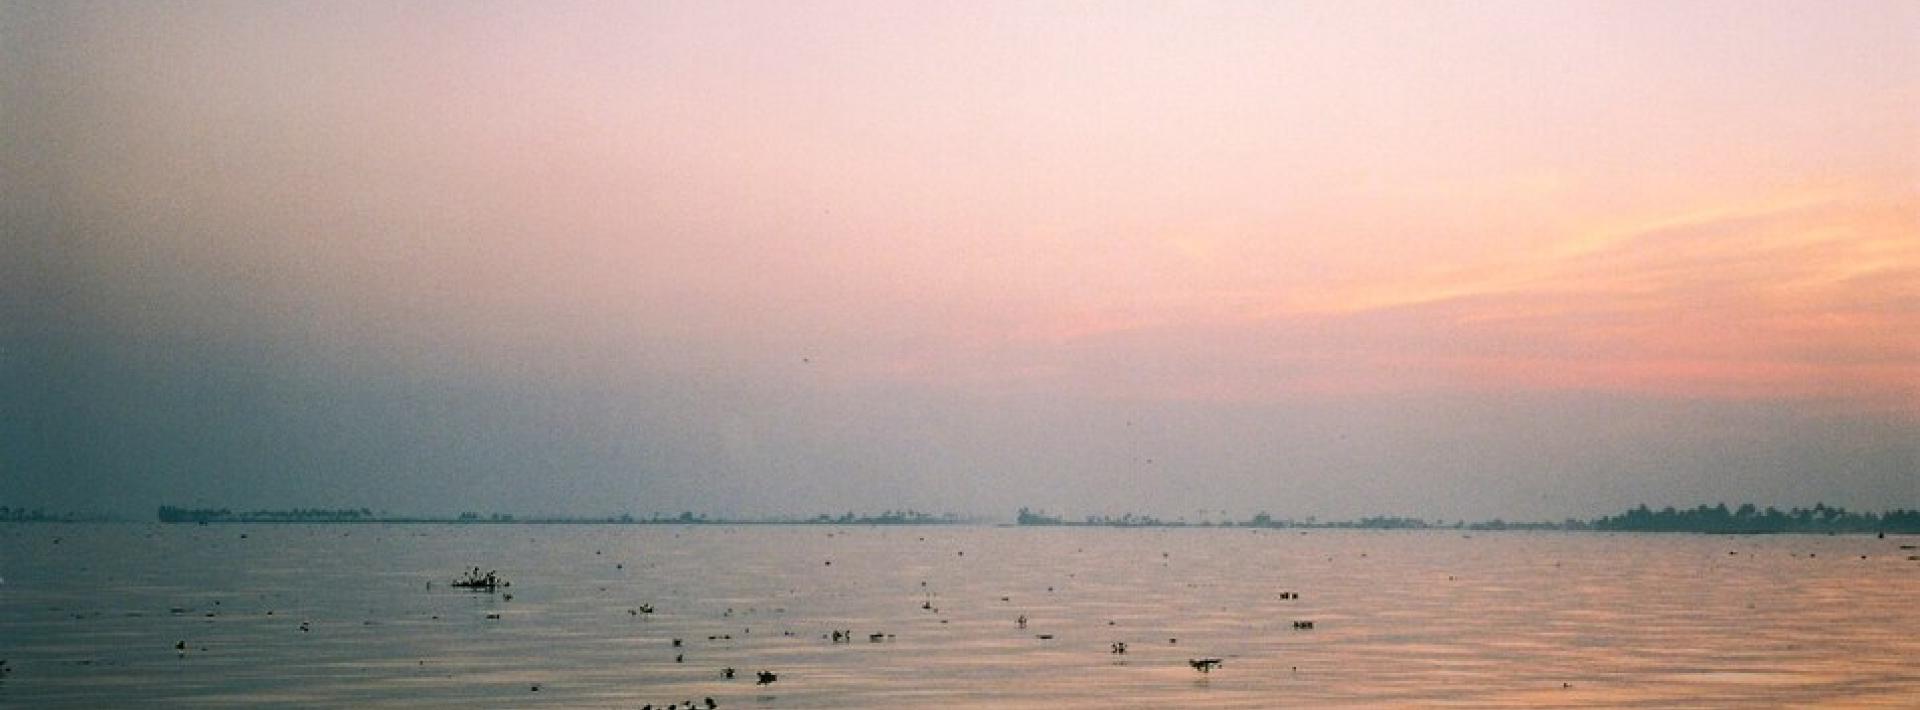 The sun rises over Lake Vembanad in Kerala. Though the region is known for its blazingly hot temperatures, overcast skies during monsoon seasons mean solar power isn’t always reliable.